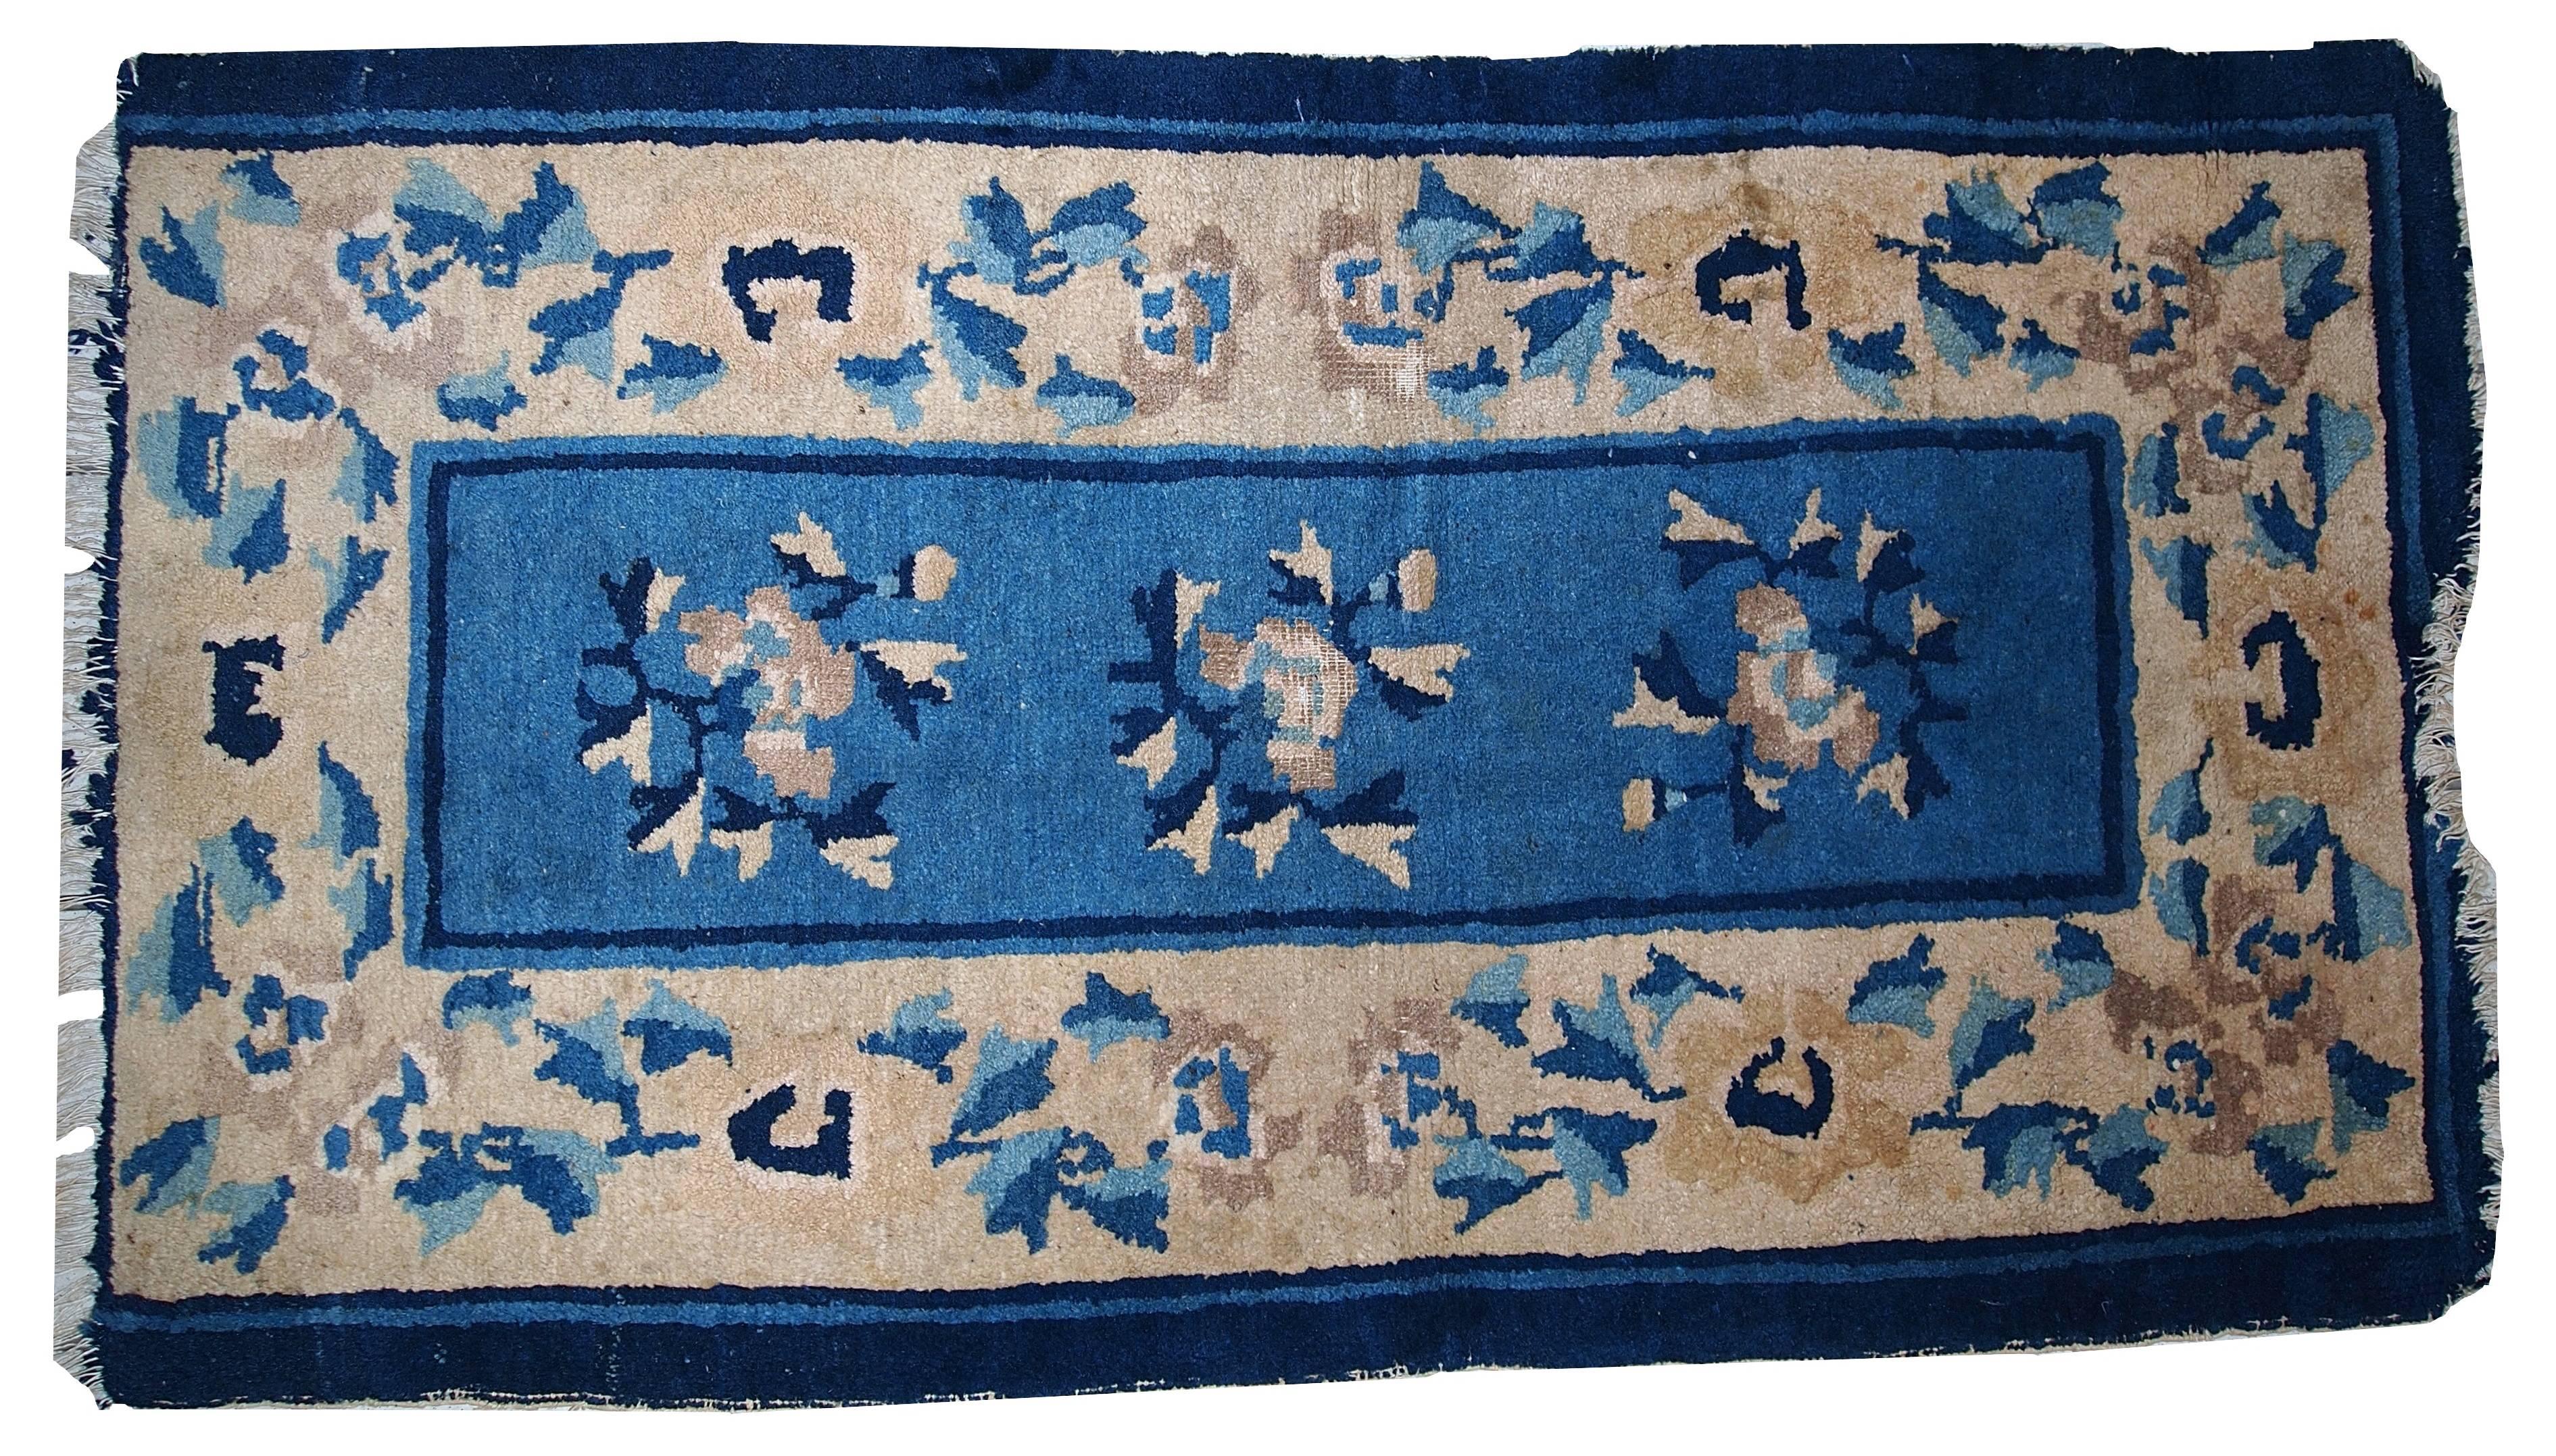 Antique peking Chinese rug in worn condition. The first border on it is navy blue, the second is larger and beige covered with flowers. Middle area is blue and has three similar flowers on it. This rug is missing one border and partly the second